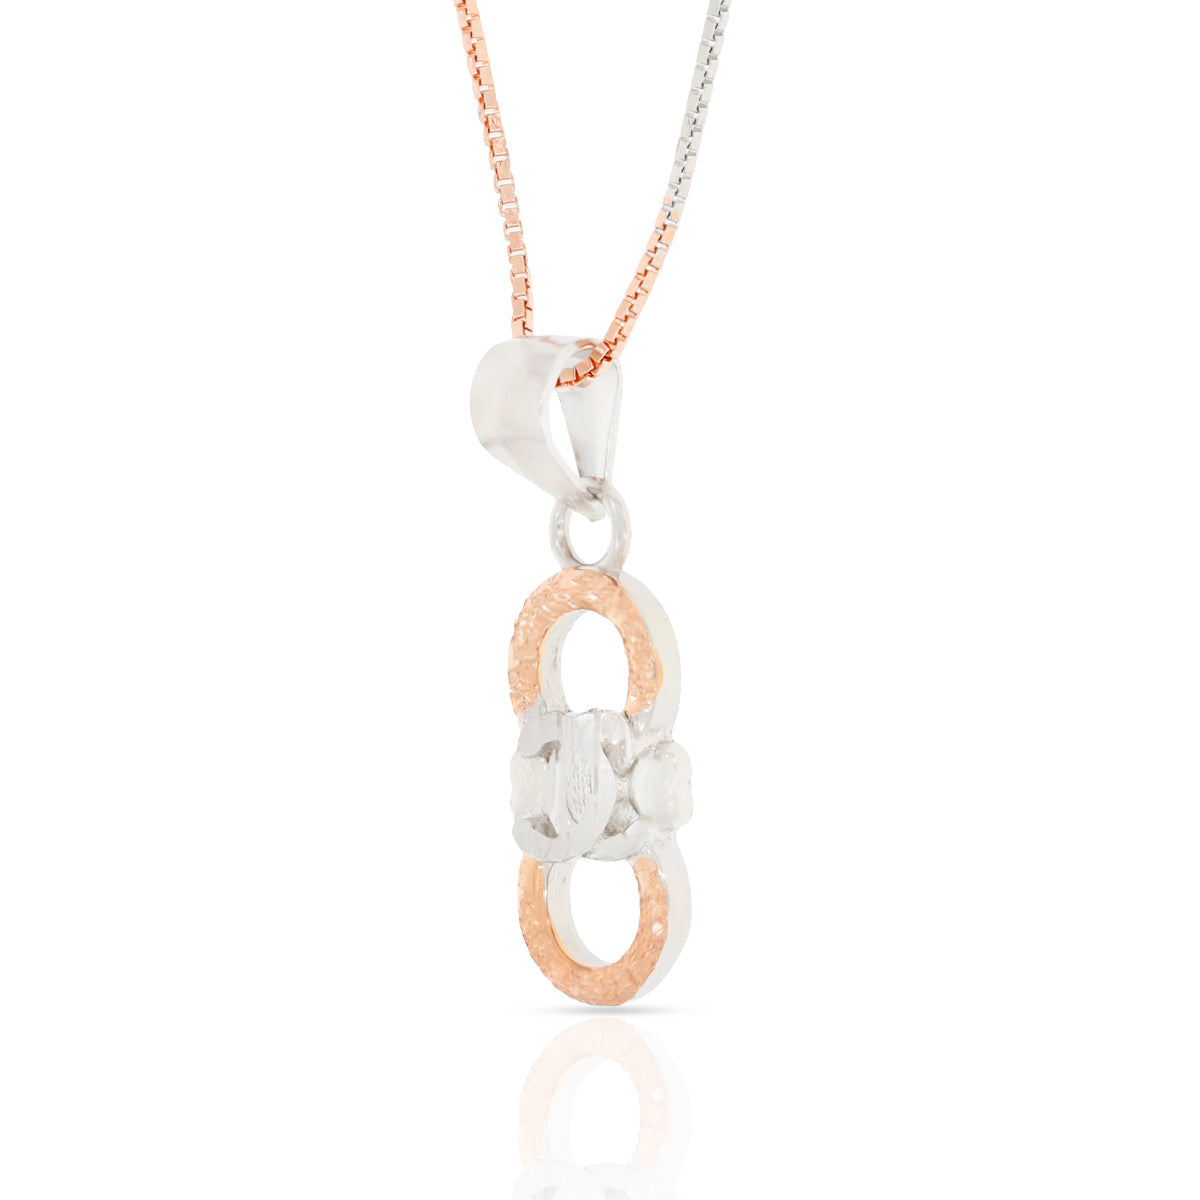 Interconnected Heart Pendant Set with Link Chain